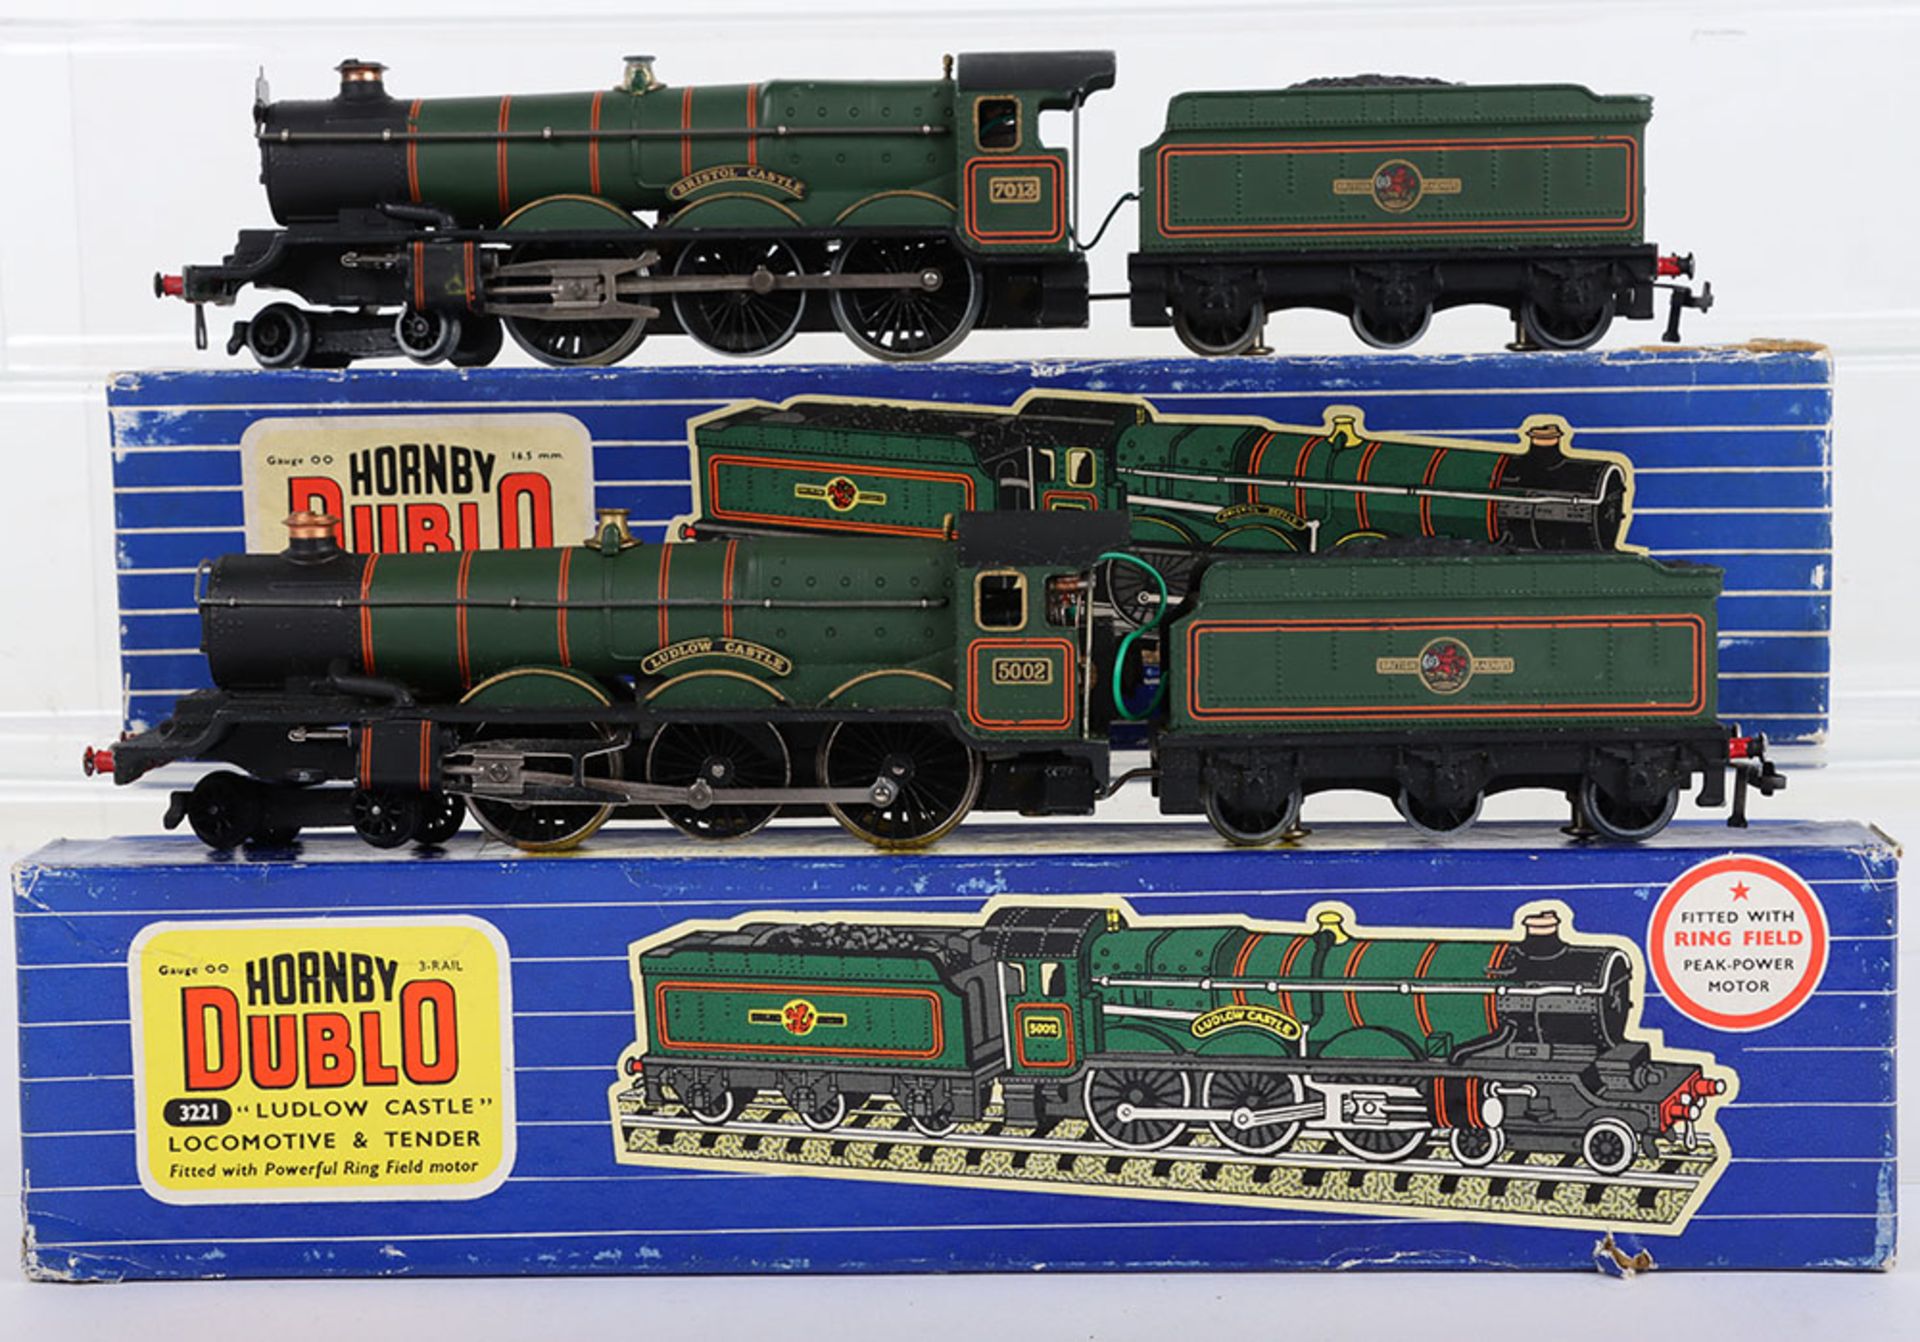 Boxed Hornby Dublo 3221 4-6-0 Ludlow Castle locomotive and tender